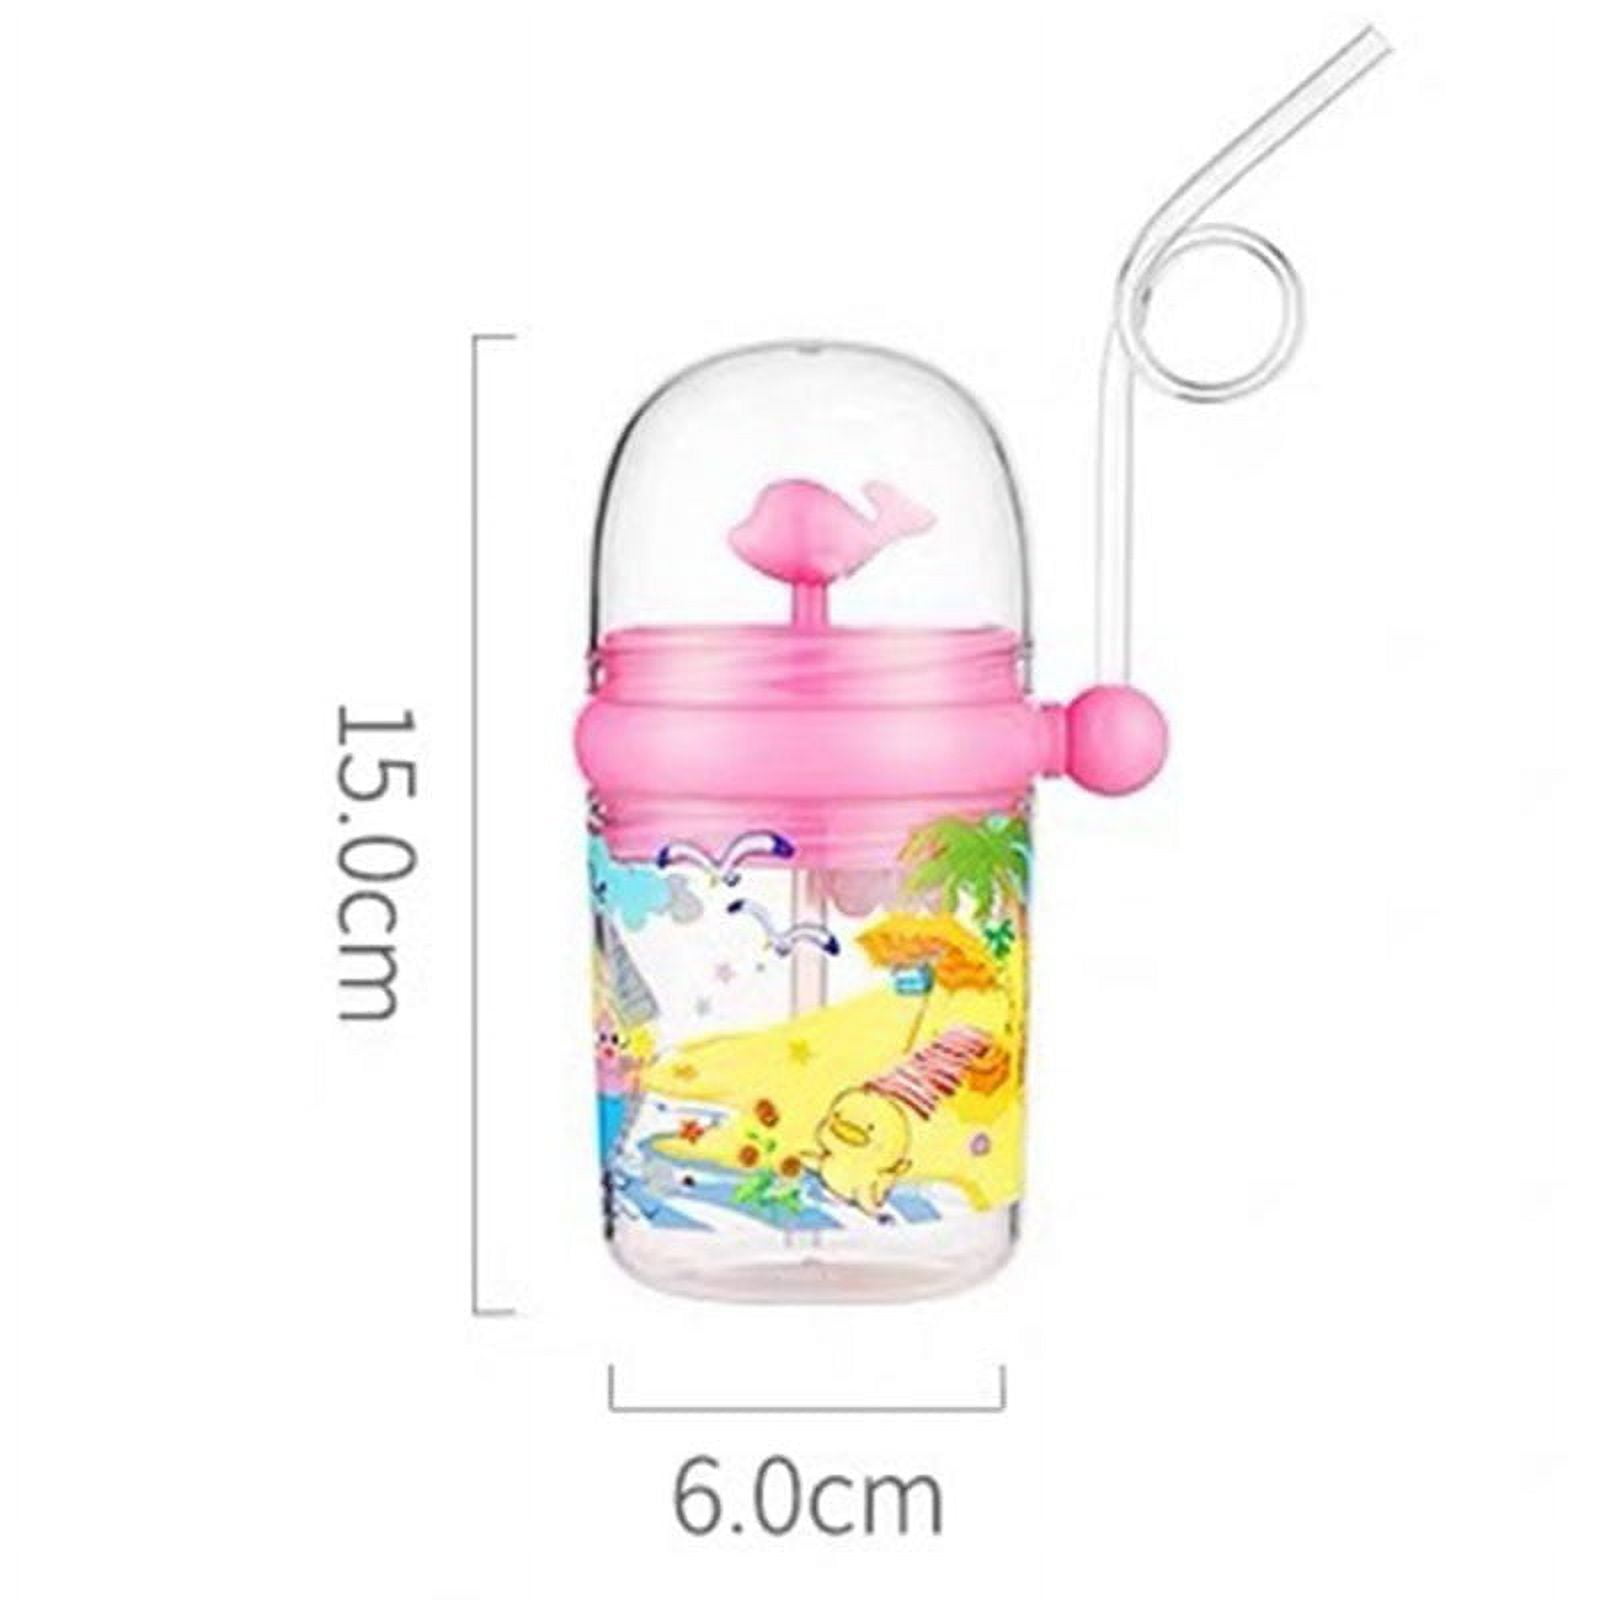 BuubiBottle Sip Sippy Cup with Straw, Proton Purple